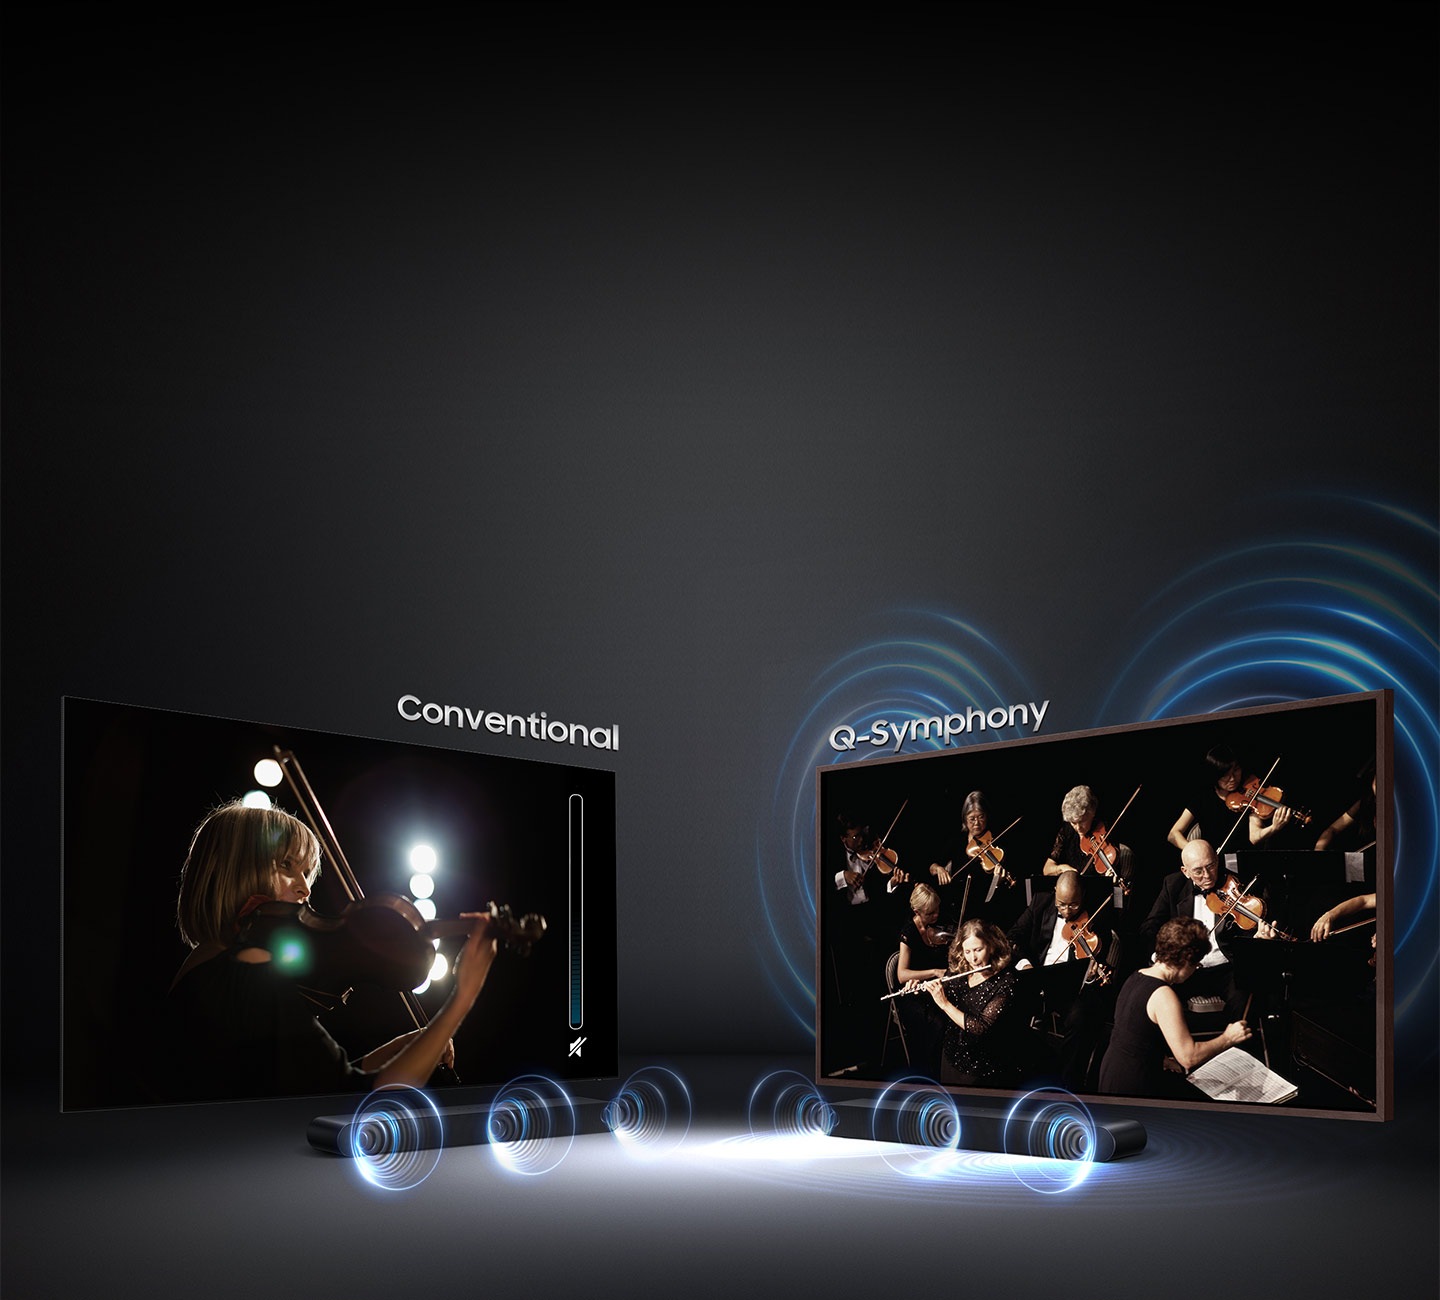 Sound wave graphics from only soundbar demonstrate conventional sound experience.
On the other hand, sound wave graphics from TV speaker and soundbar show that Q Symphony allows sound to be heard simultaneously from TV speaker and soundbar.